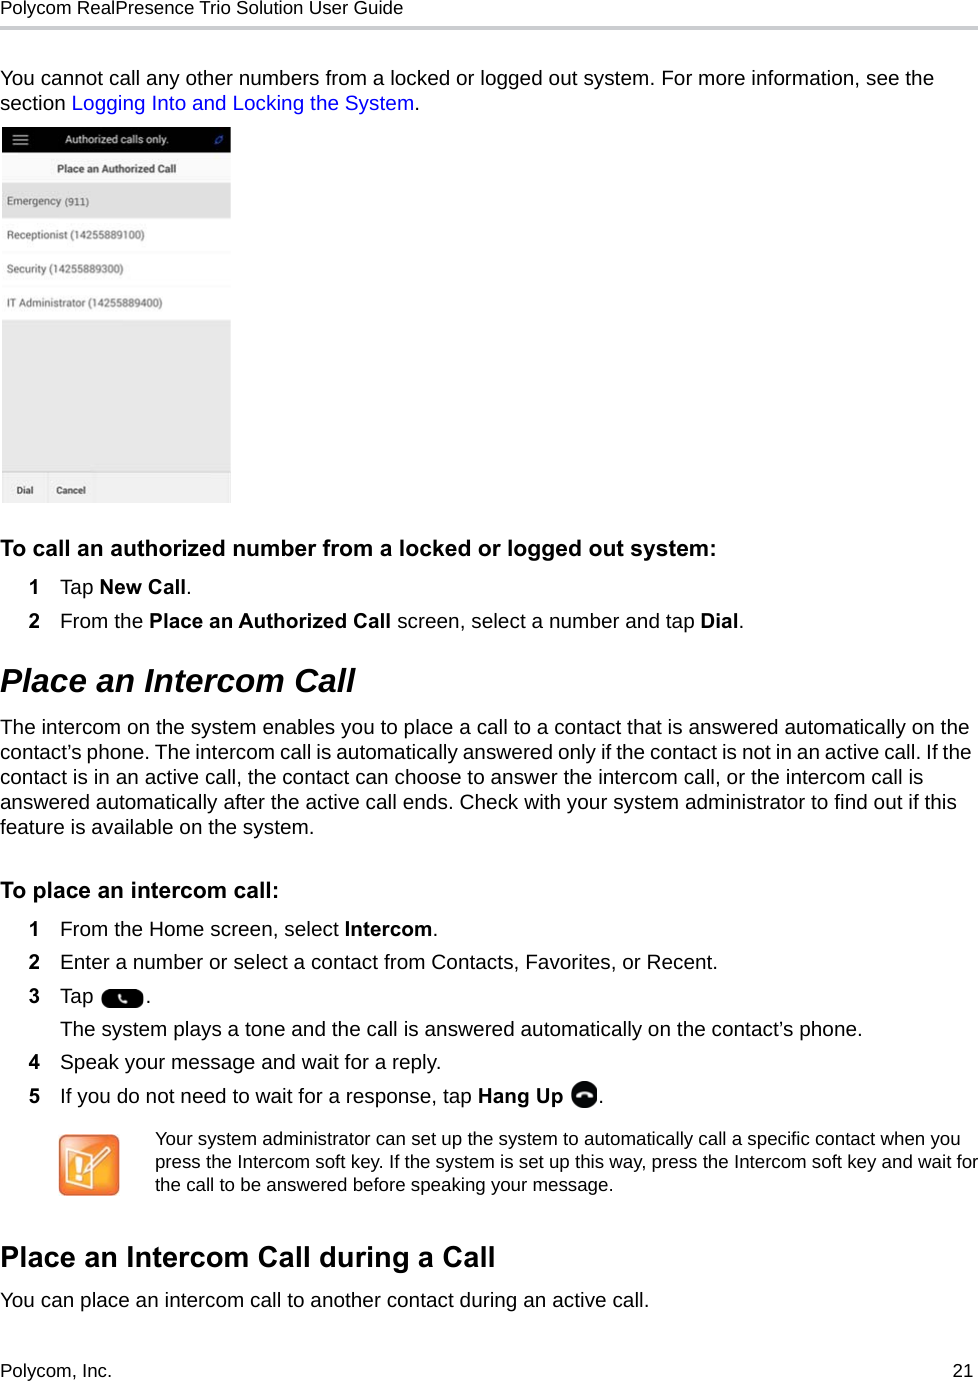 Polycom RealPresence Trio Solution User Guide Polycom, Inc.  21   You cannot call any other numbers from a locked or logged out system. For more information, see the section Logging Into and Locking the System.To call an authorized number from a locked or logged out system:1Tap New Call. 2From the Place an Authorized Call screen, select a number and tap Dial.Place an Intercom CallThe intercom on the system enables you to place a call to a contact that is answered automatically on the contact’s phone. The intercom call is automatically answered only if the contact is not in an active call. If the contact is in an active call, the contact can choose to answer the intercom call, or the intercom call is answered automatically after the active call ends. Check with your system administrator to find out if this feature is available on the system.To place an intercom call:1From the Home screen, select Intercom.2Enter a number or select a contact from Contacts, Favorites, or Recent.3Tap .The system plays a tone and the call is answered automatically on the contact’s phone. 4Speak your message and wait for a reply.5If you do not need to wait for a response, tap Hang Up  .Place an Intercom Call during a CallYou can place an intercom call to another contact during an active call.Your system administrator can set up the system to automatically call a specific contact when you press the Intercom soft key. If the system is set up this way, press the Intercom soft key and wait for the call to be answered before speaking your message.